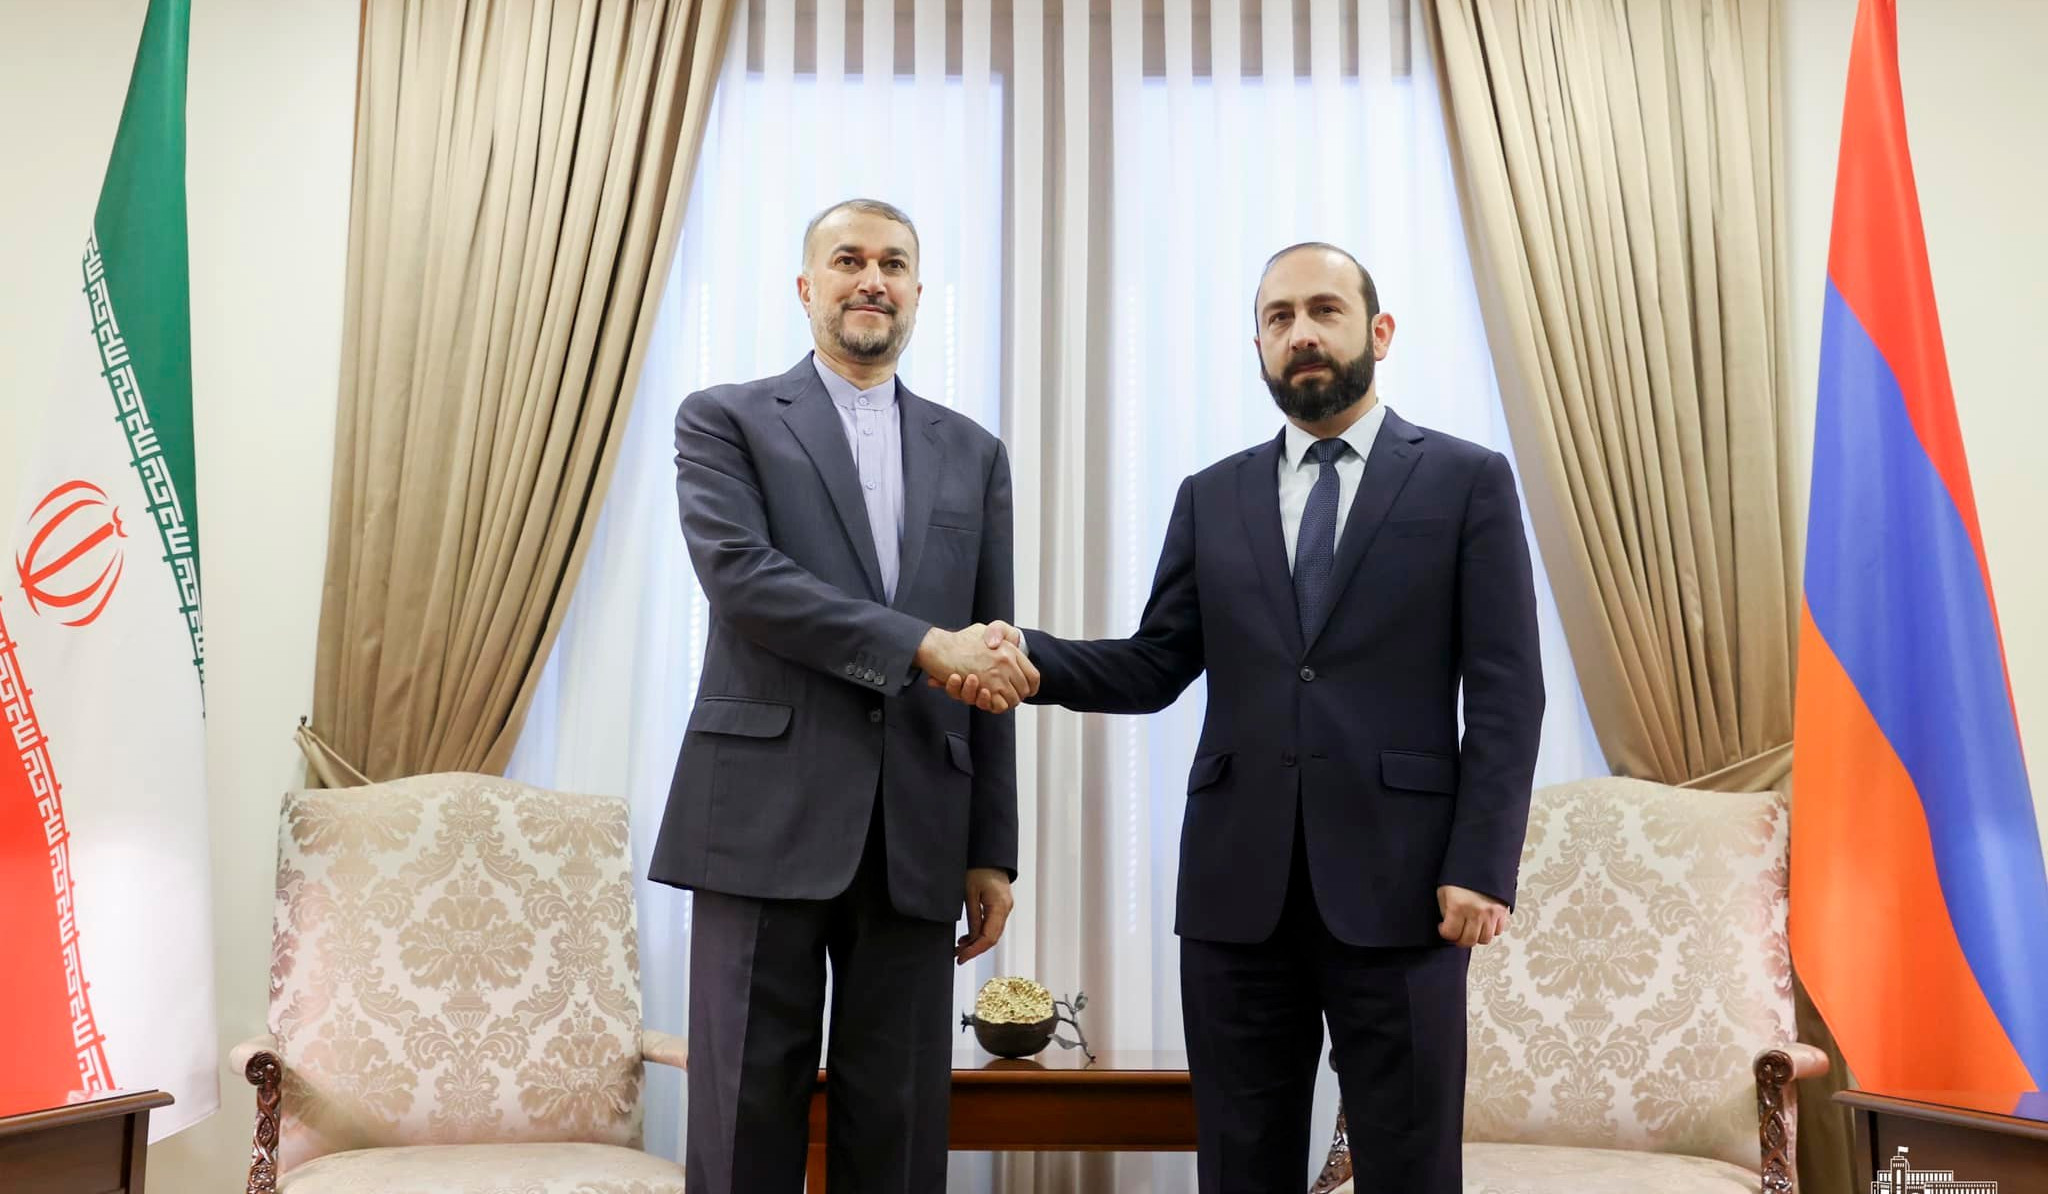 Tête-à-tête meeting between Foreign Ministers of Armenia and Iran took place